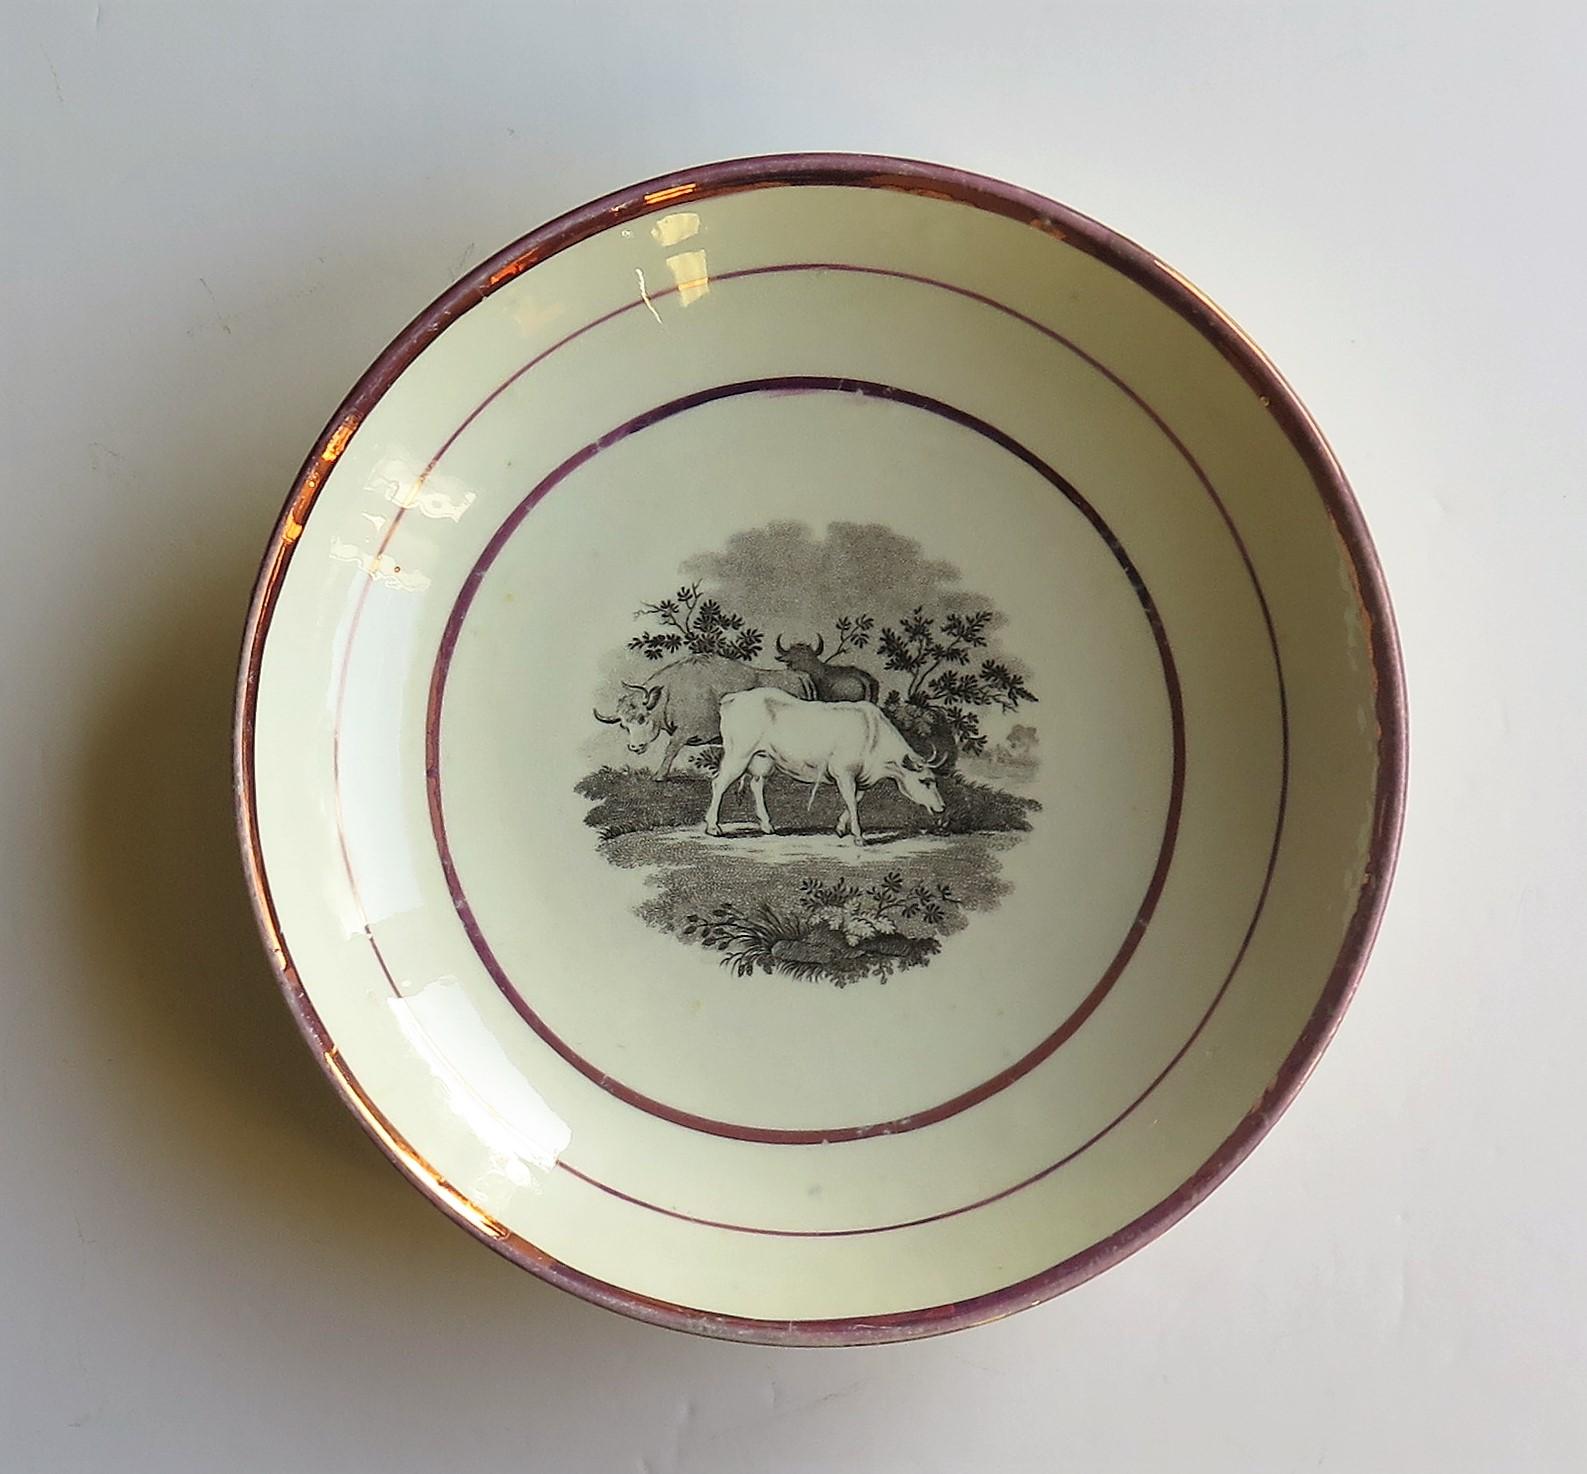 Georgian Sunderland Porcelain Lustre Dish or Plate, English Early 19th Century For Sale 3